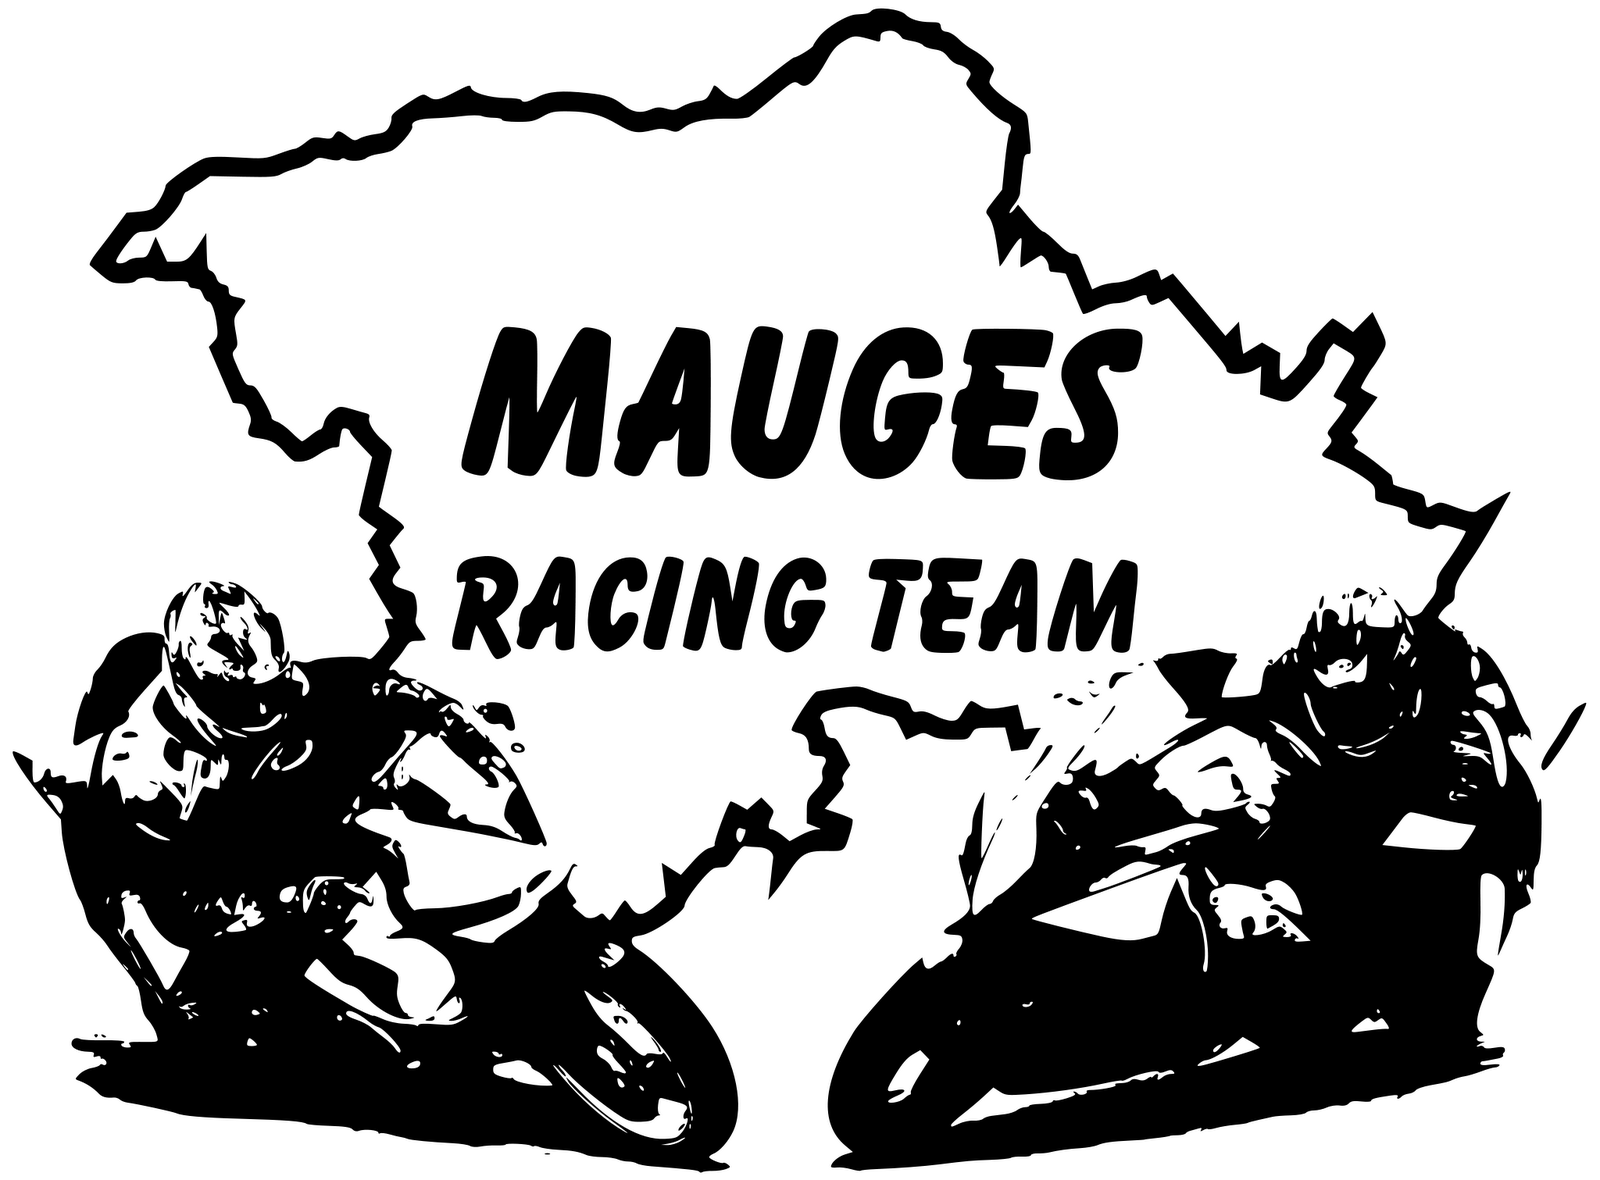 Mauges Racing Team